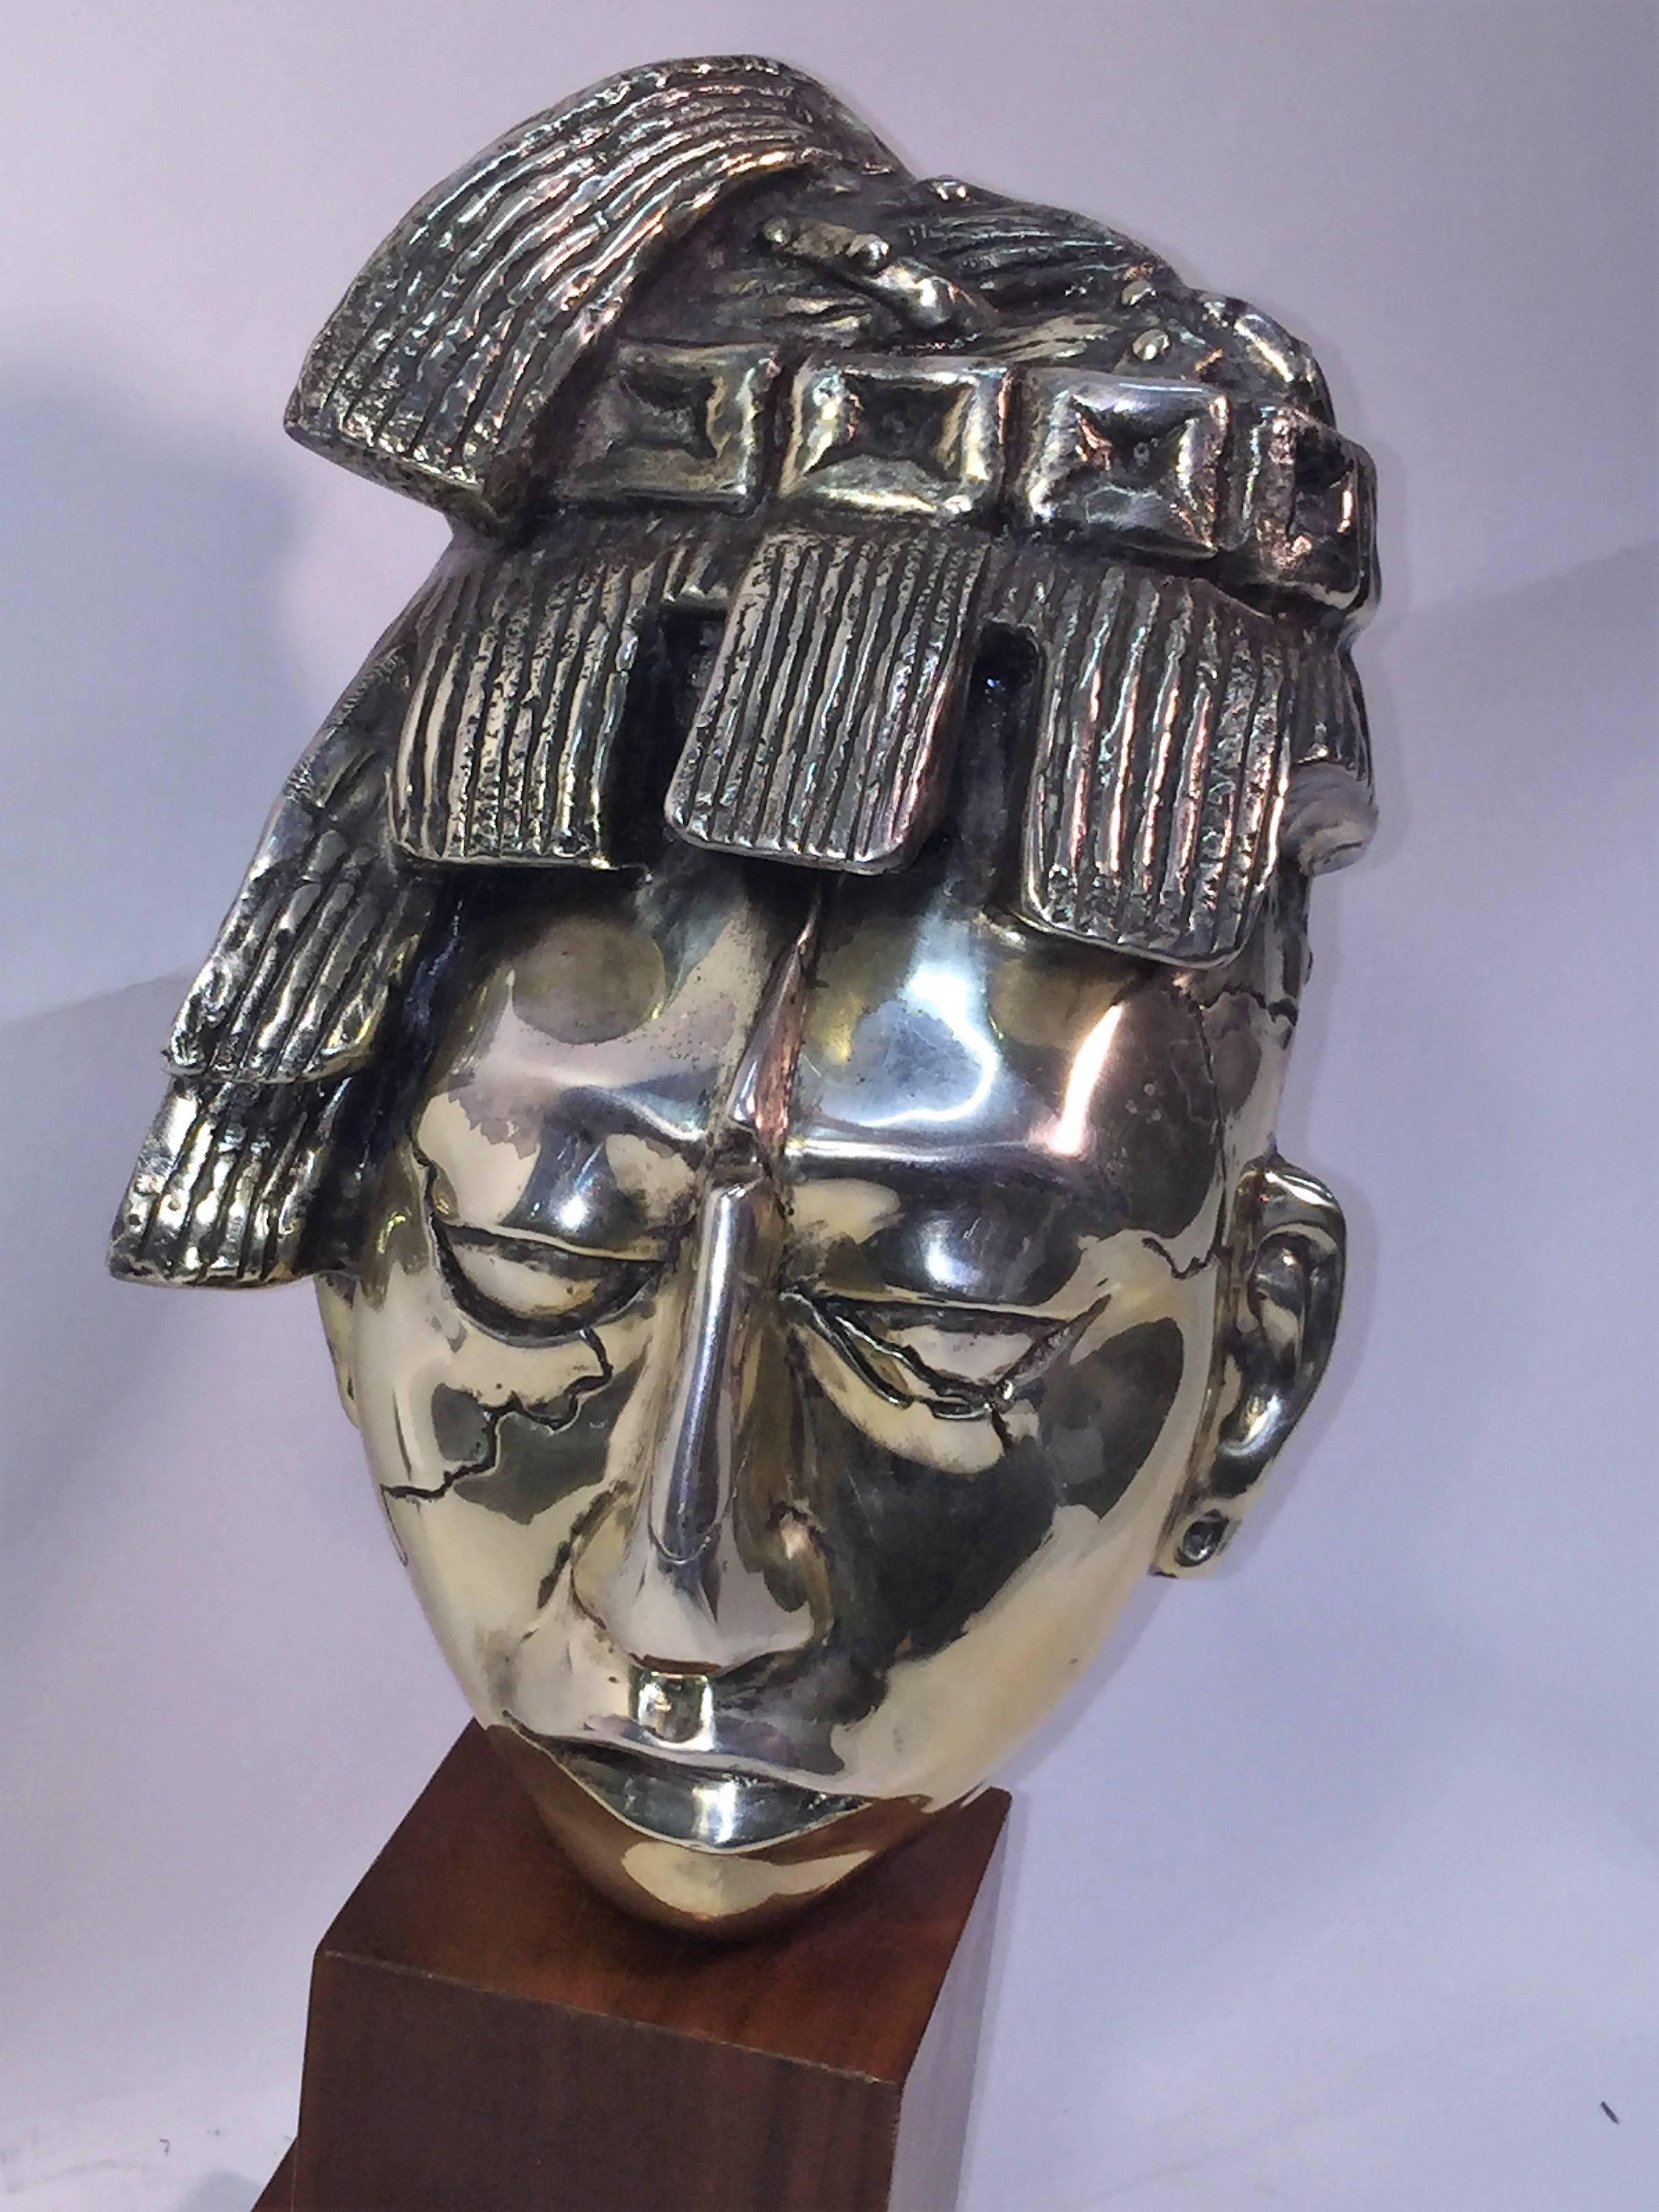 Modernist slivered bronze head of an Aztec warrior mounted on a quality wood pedestal, circa 1970s, cool sculpture for a console or grouping in a modern interior. The measurements of the wood base is 1' square and 1